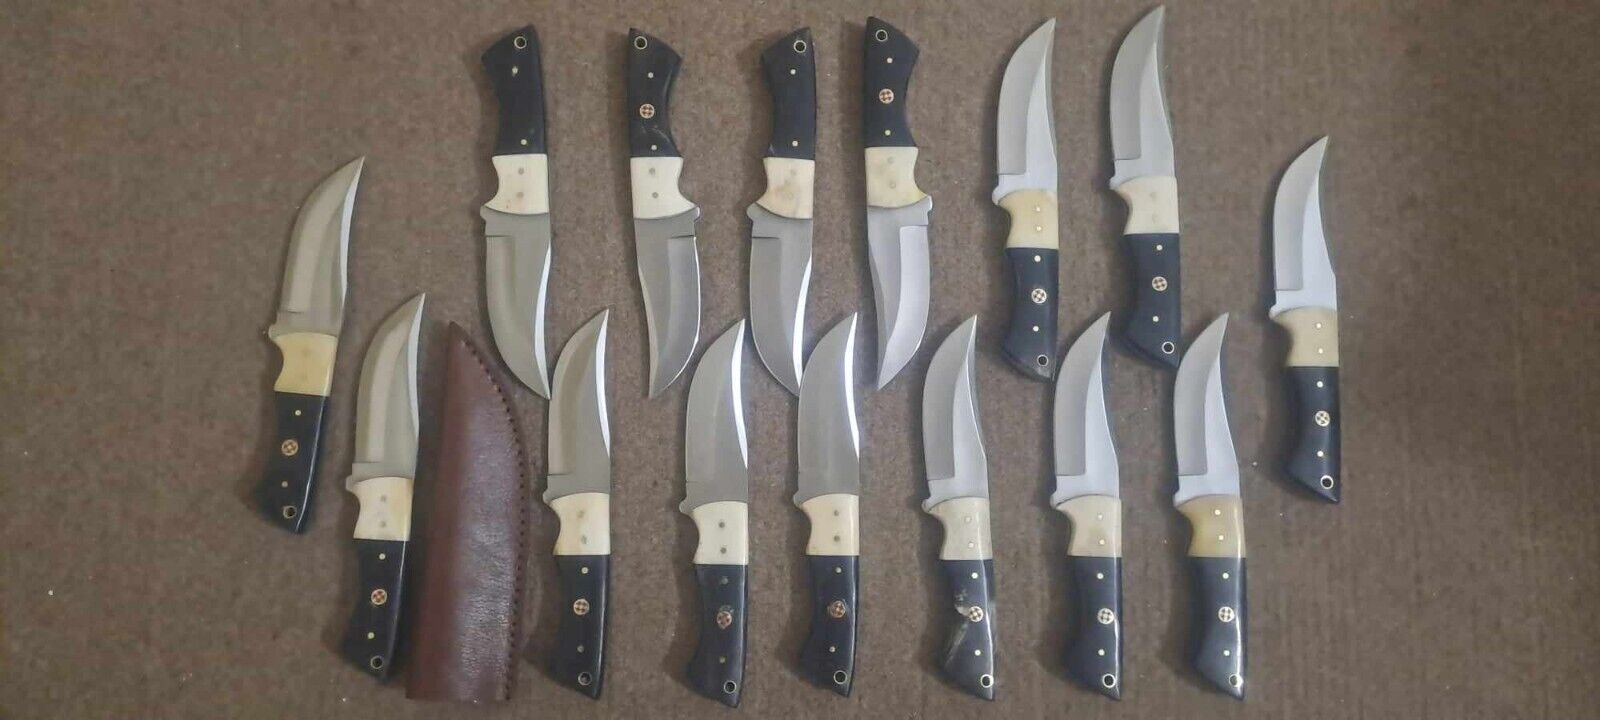 LOT OF 15 HANDCRAFTED CUSTOM HANDMADE J2 STEEL KNIVES FOR HUNTING AND SKINNING